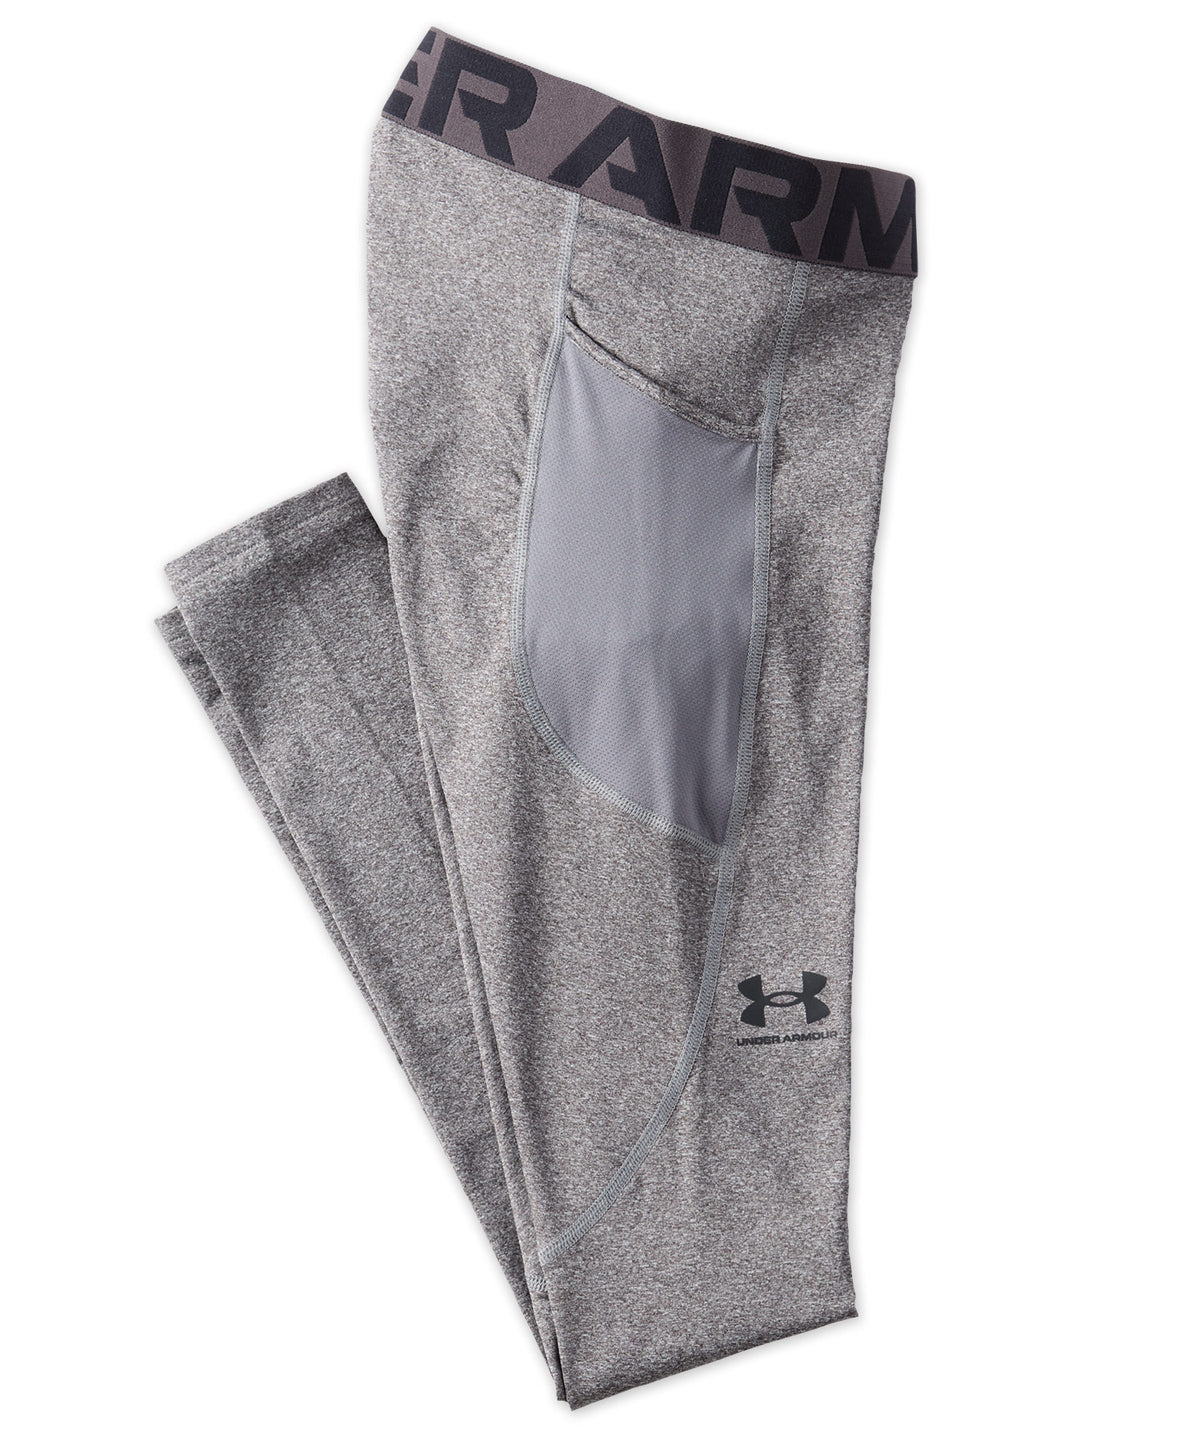 Under Armour Cold Gear Armour Leggings, Men's Big & Tall